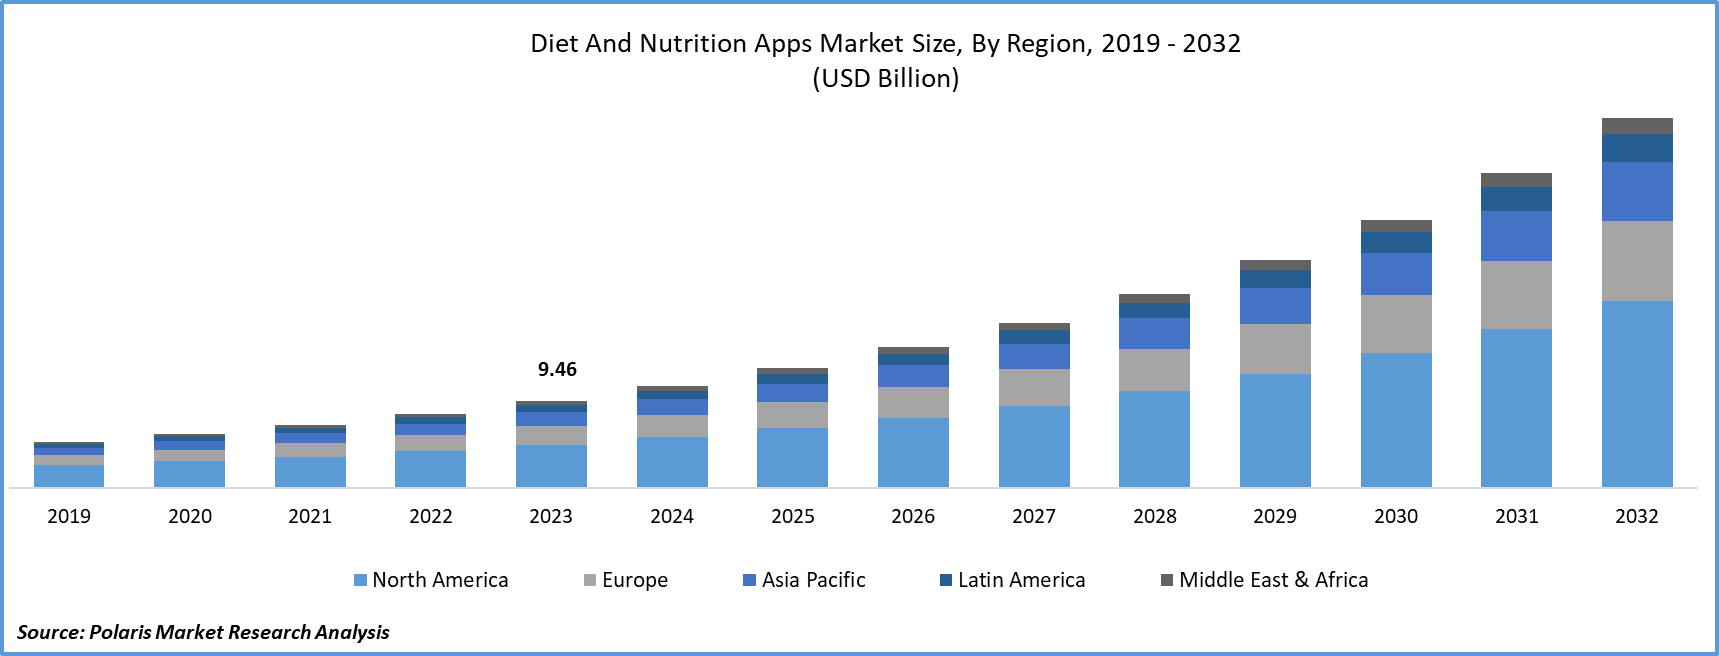 Diet and Nutrition Apps Market Size